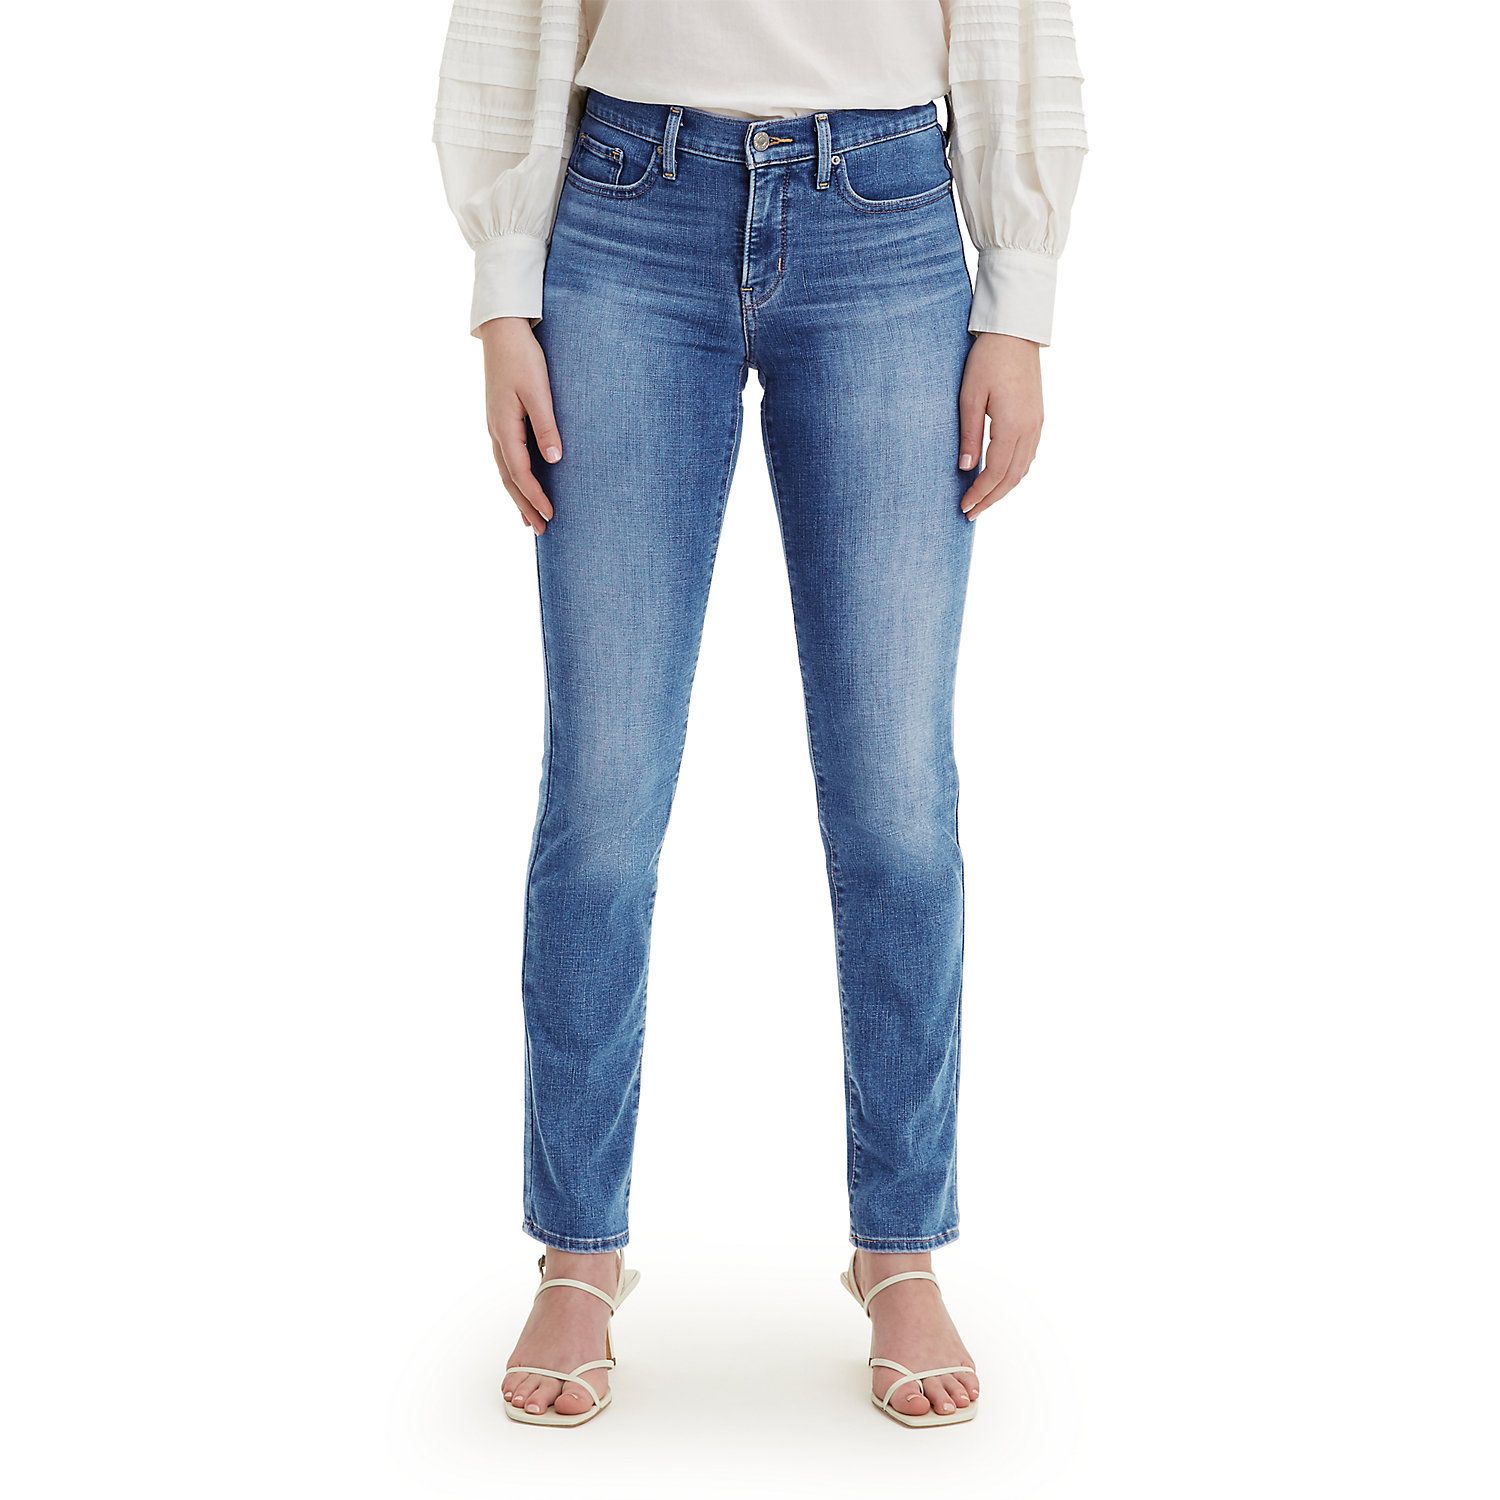 Image for Levi's Women's 312 Shaping Slim Jeans at Kohl's.